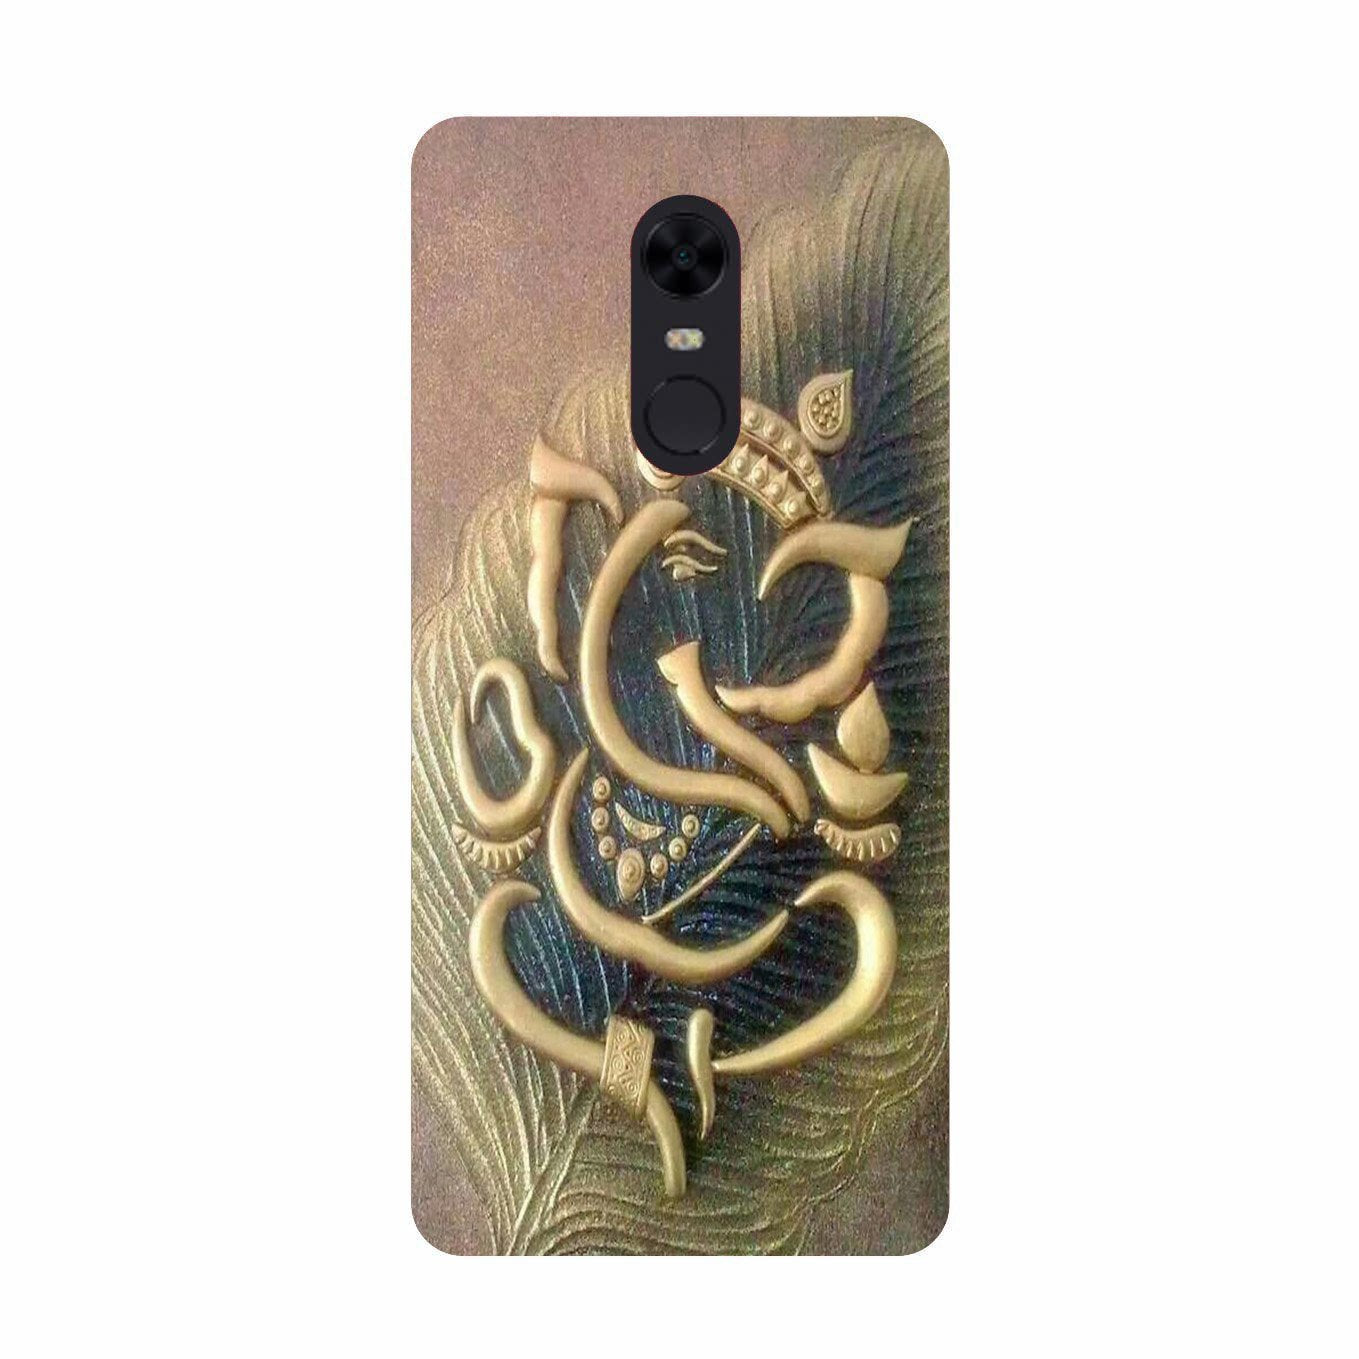 Lord Ganesha Case for Redmi Note 5